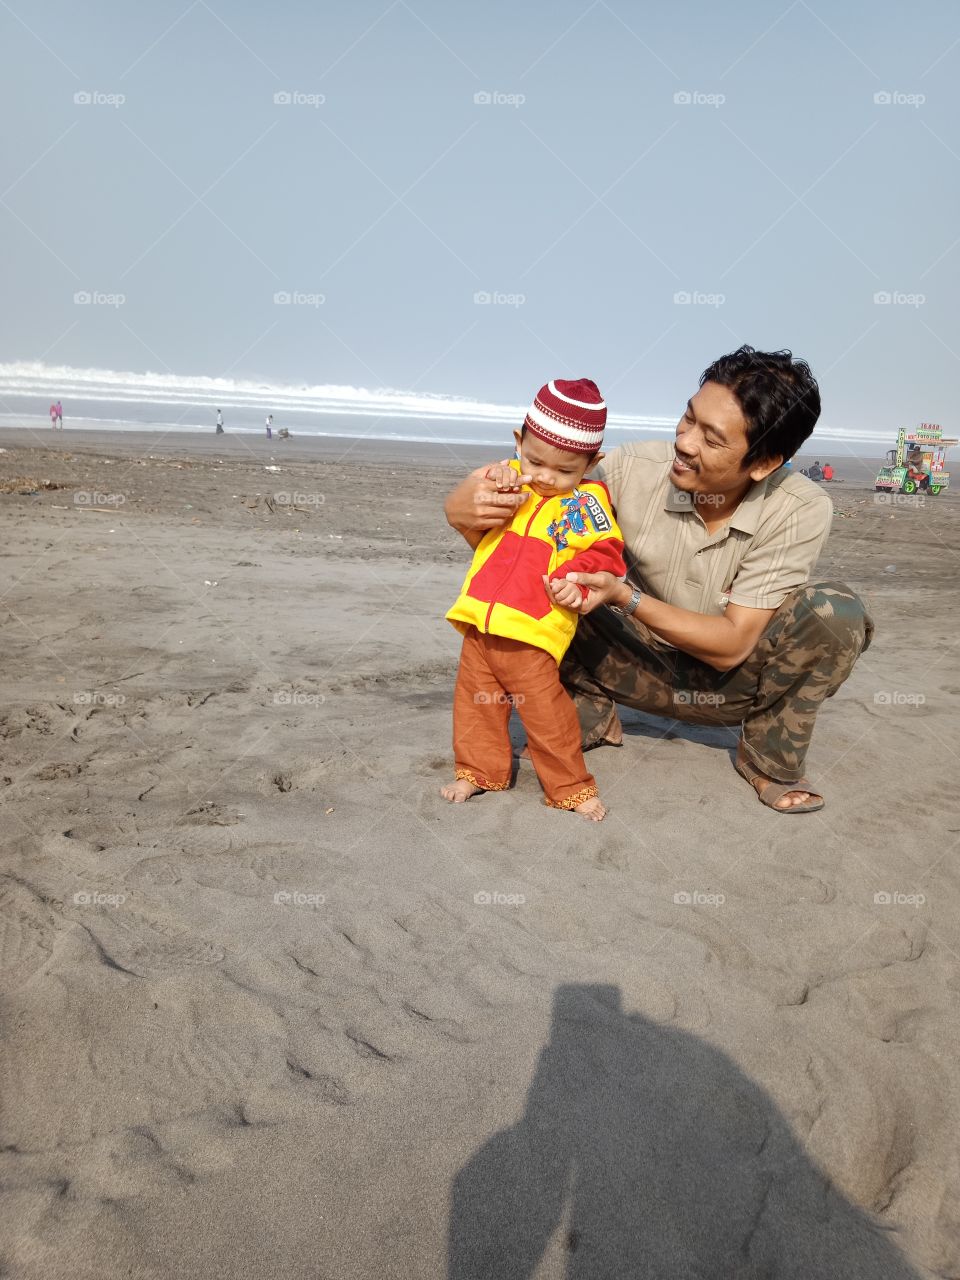 a baby boy learns to walk with his father on the beach